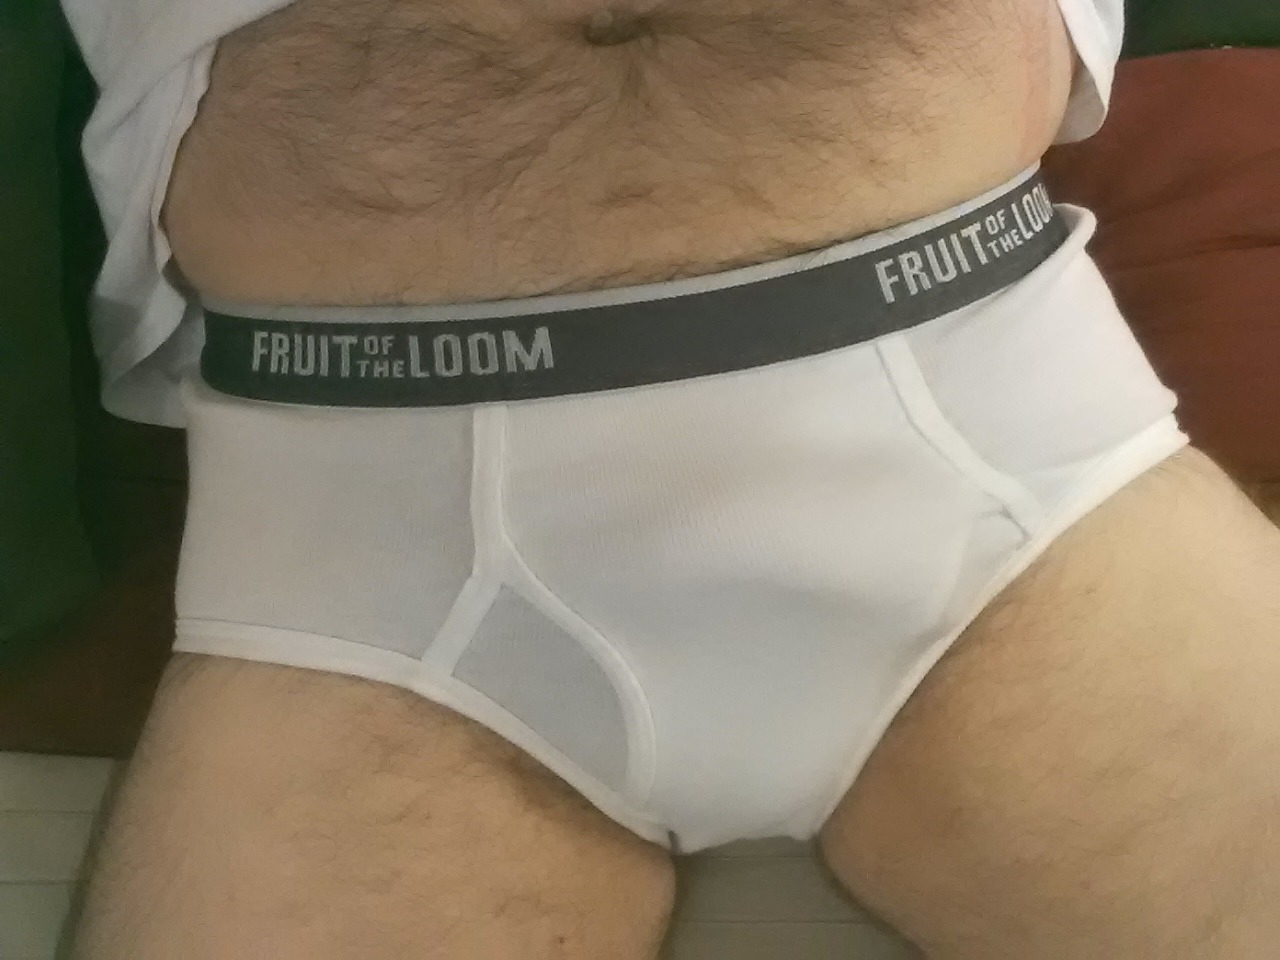 lovewhitebriefs:</p><br /><br /><br /><br /><br /><br /><br /><br /><br /><br /><br /><br /><br /><br /> <p>Incredibly hot fan submission! Thanks for sharing!</p><br /><br /><br /><br /><br /><br /><br /><br /><br /><br /><br /><br /><br /><br /> <p>Nice bulge